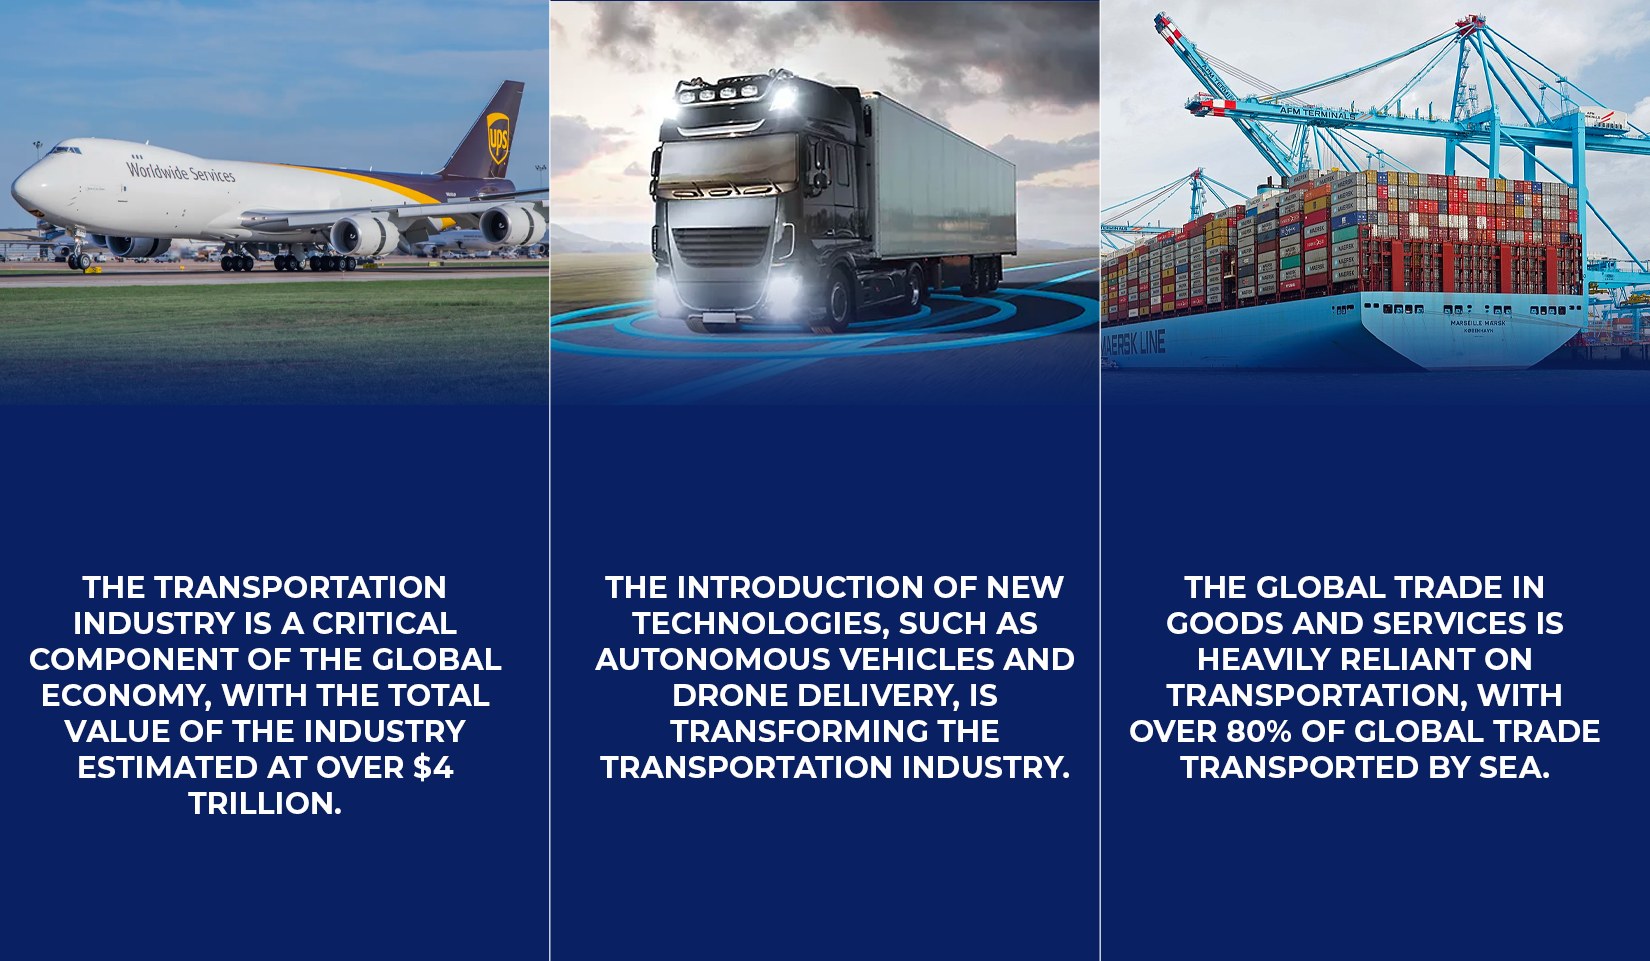 Did you know facts on the transportation industry